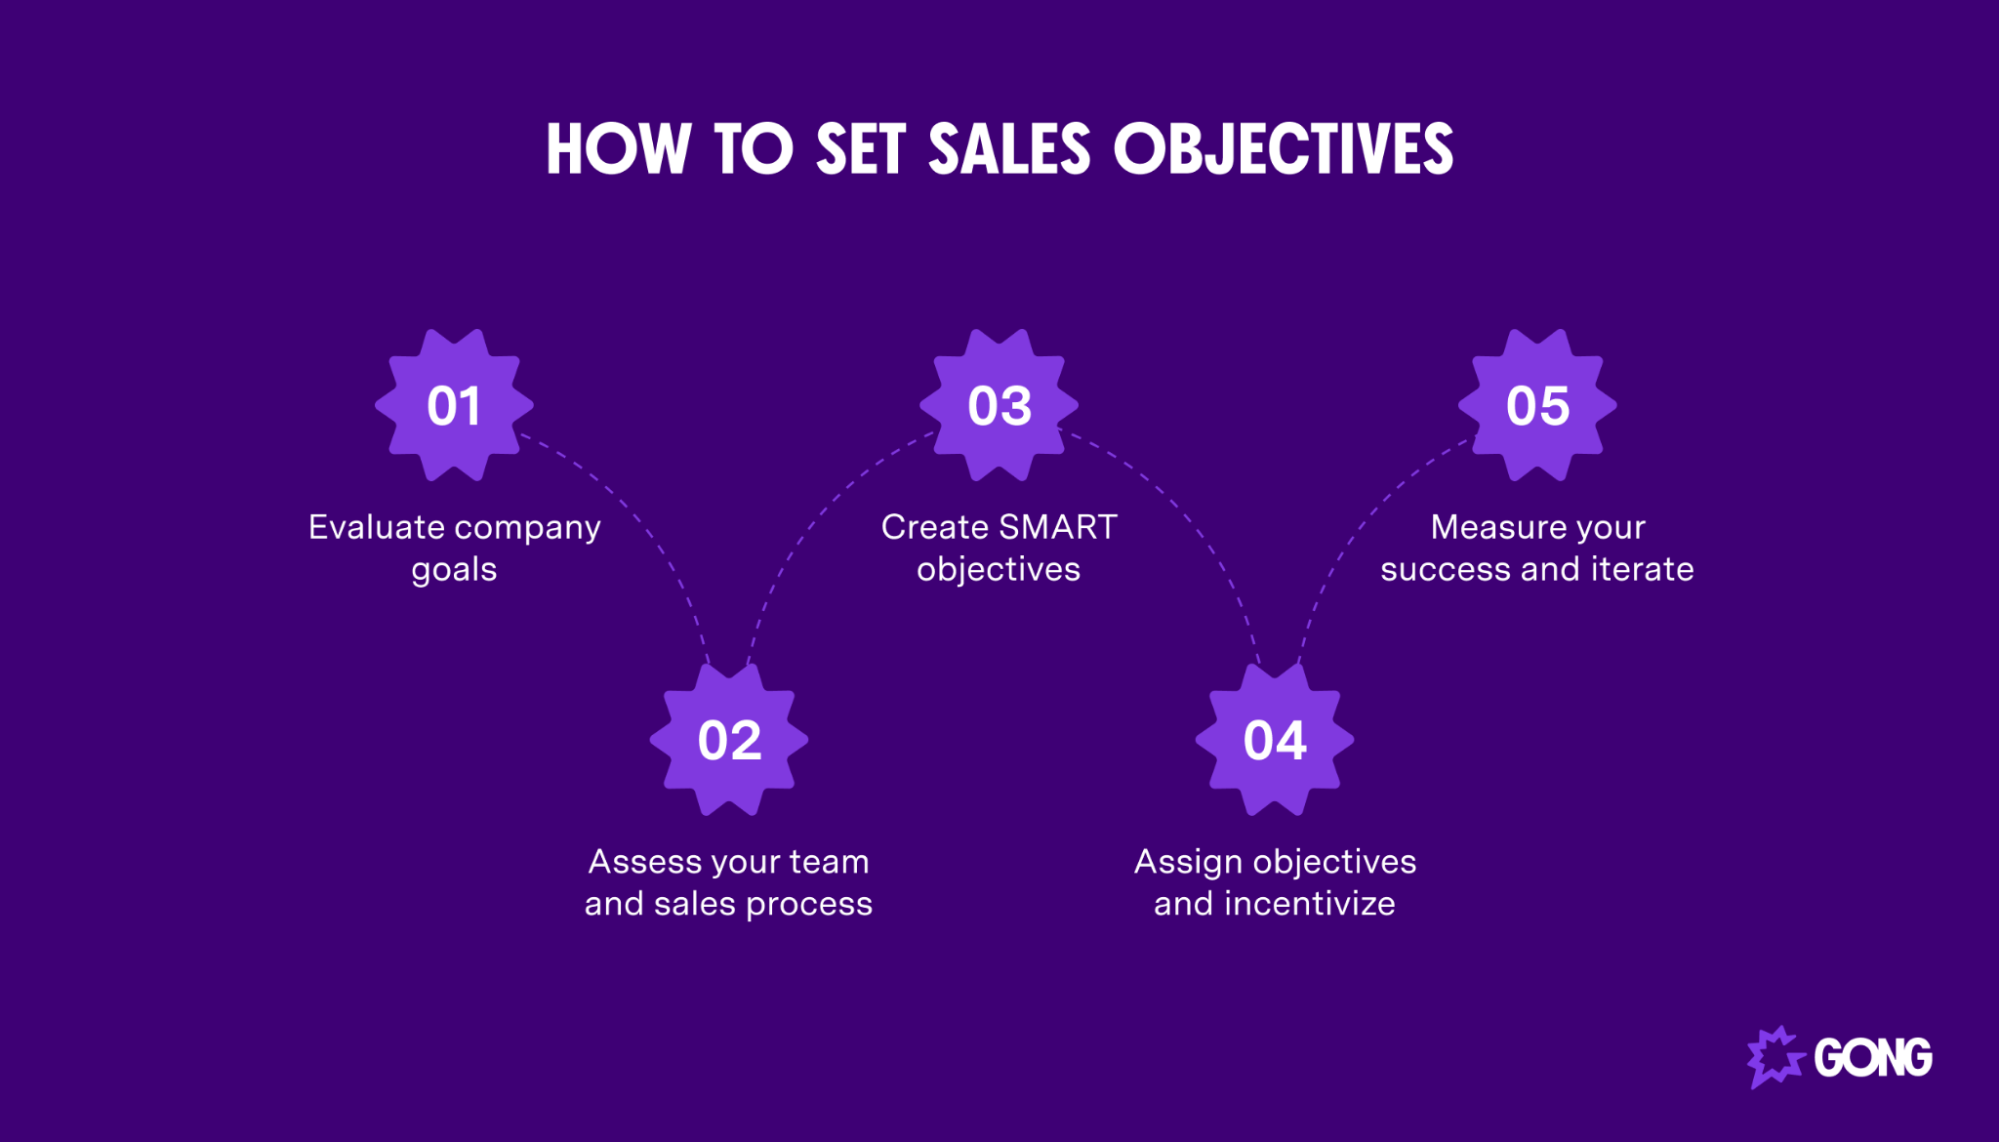 How to set sales objectives in 5 steps